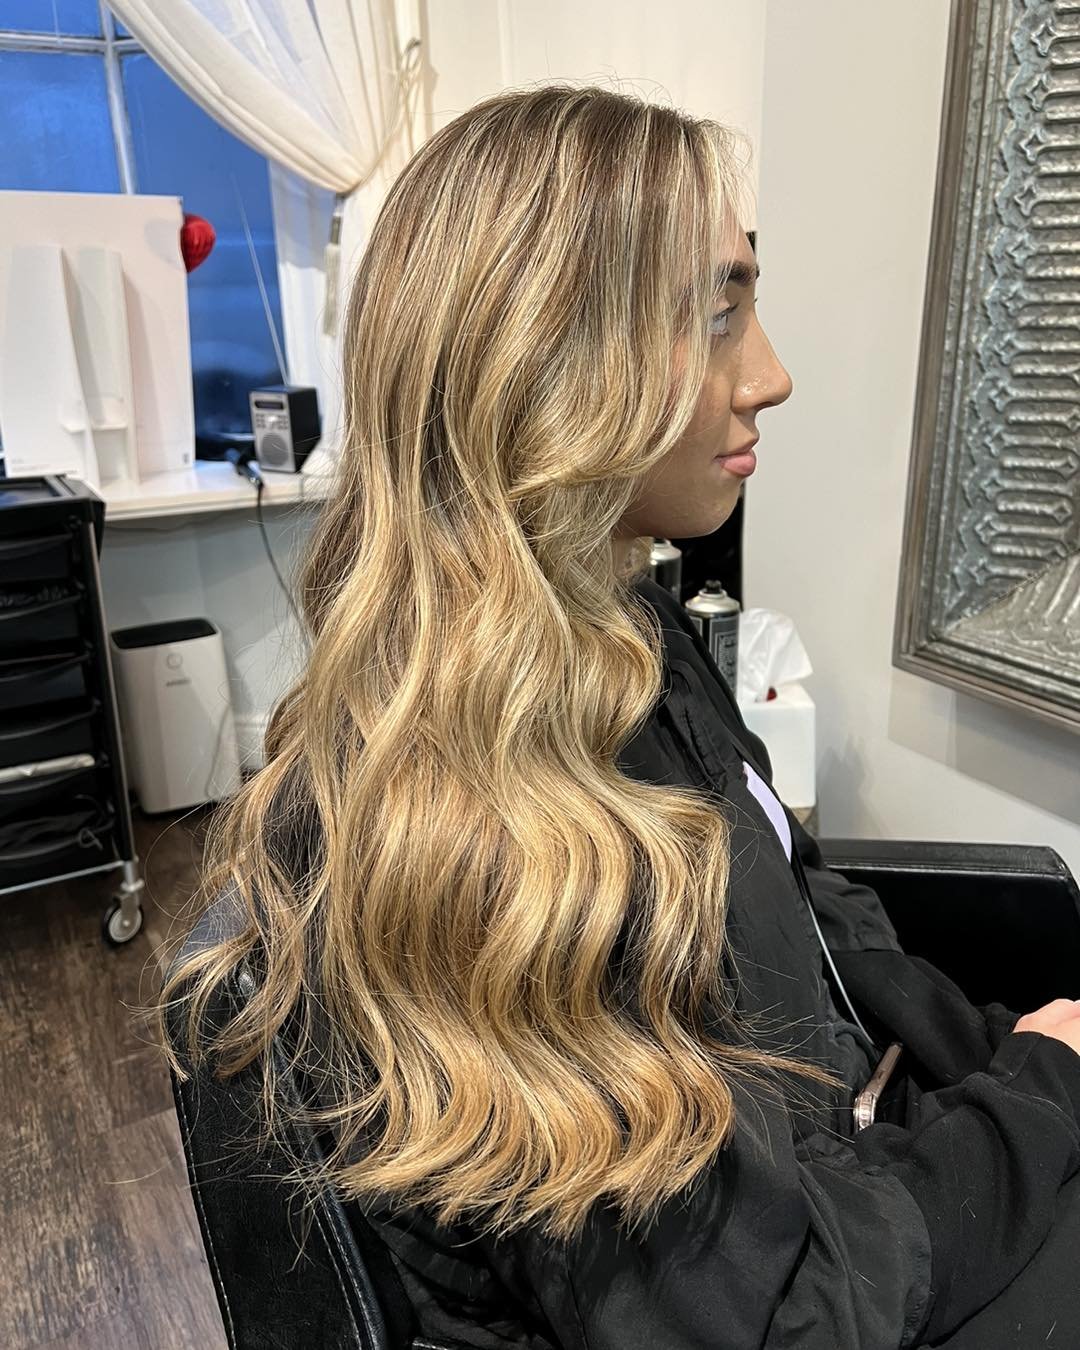 ✨ Get ready to shine with golden waves and babylights by Tom! 💛✨

Experience the magic of dimensional and healthy blonde hair that will leave you feeling fabulous! ✨✨

Tom's expert touch creates stunning golden waves that add movement and texture to